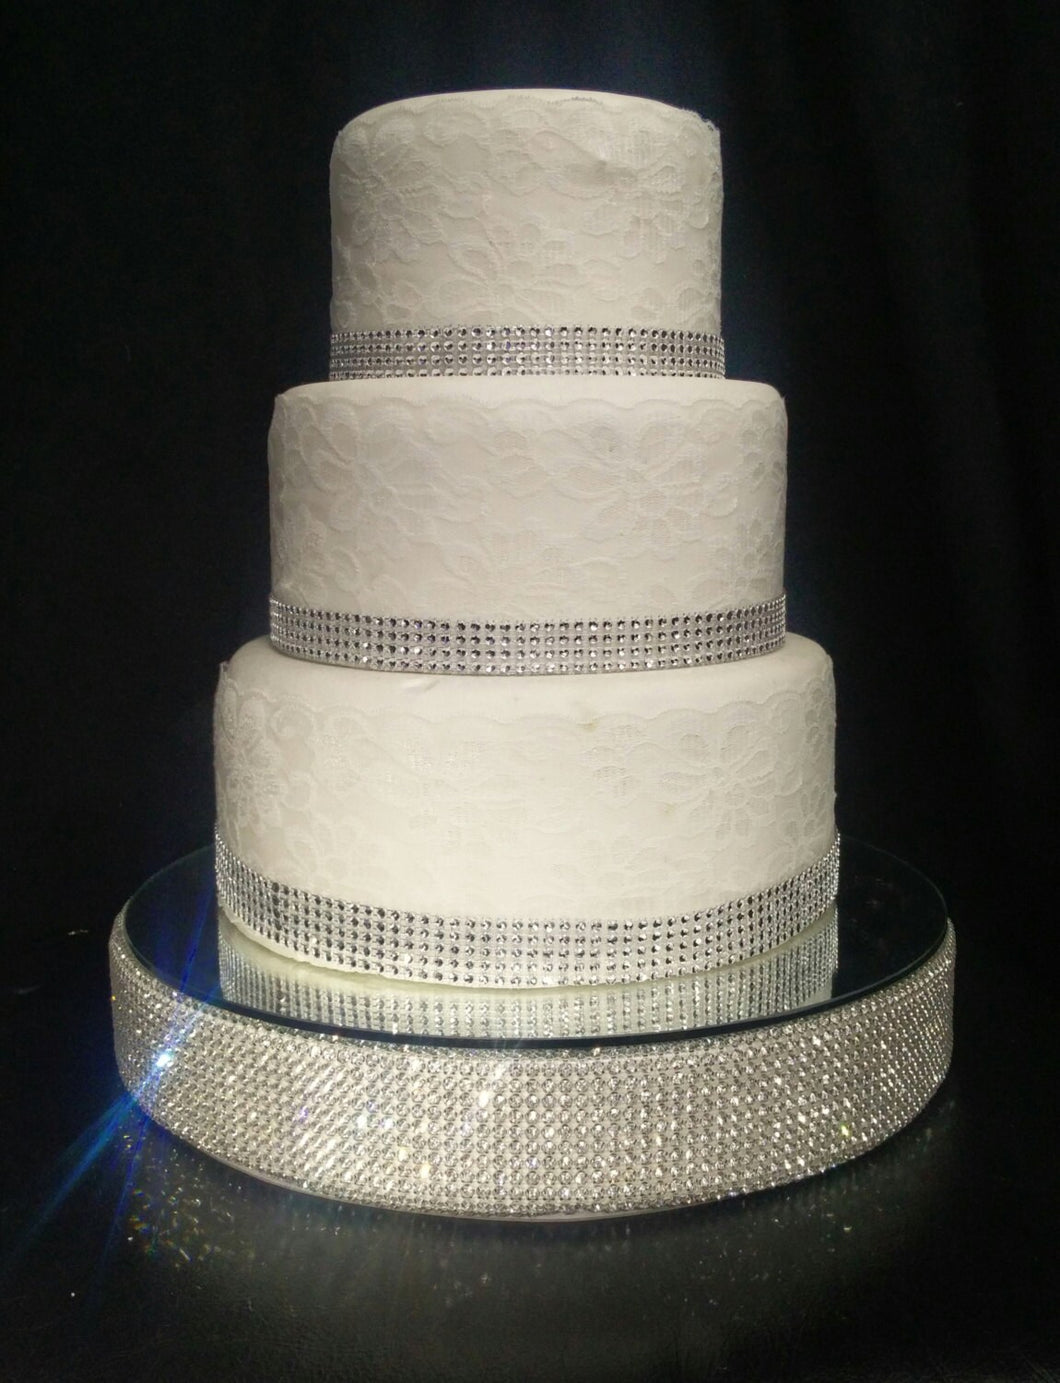 Rhinestone Diamante cake stand   YES -Contains REAL stones! by Crystal wedding uk